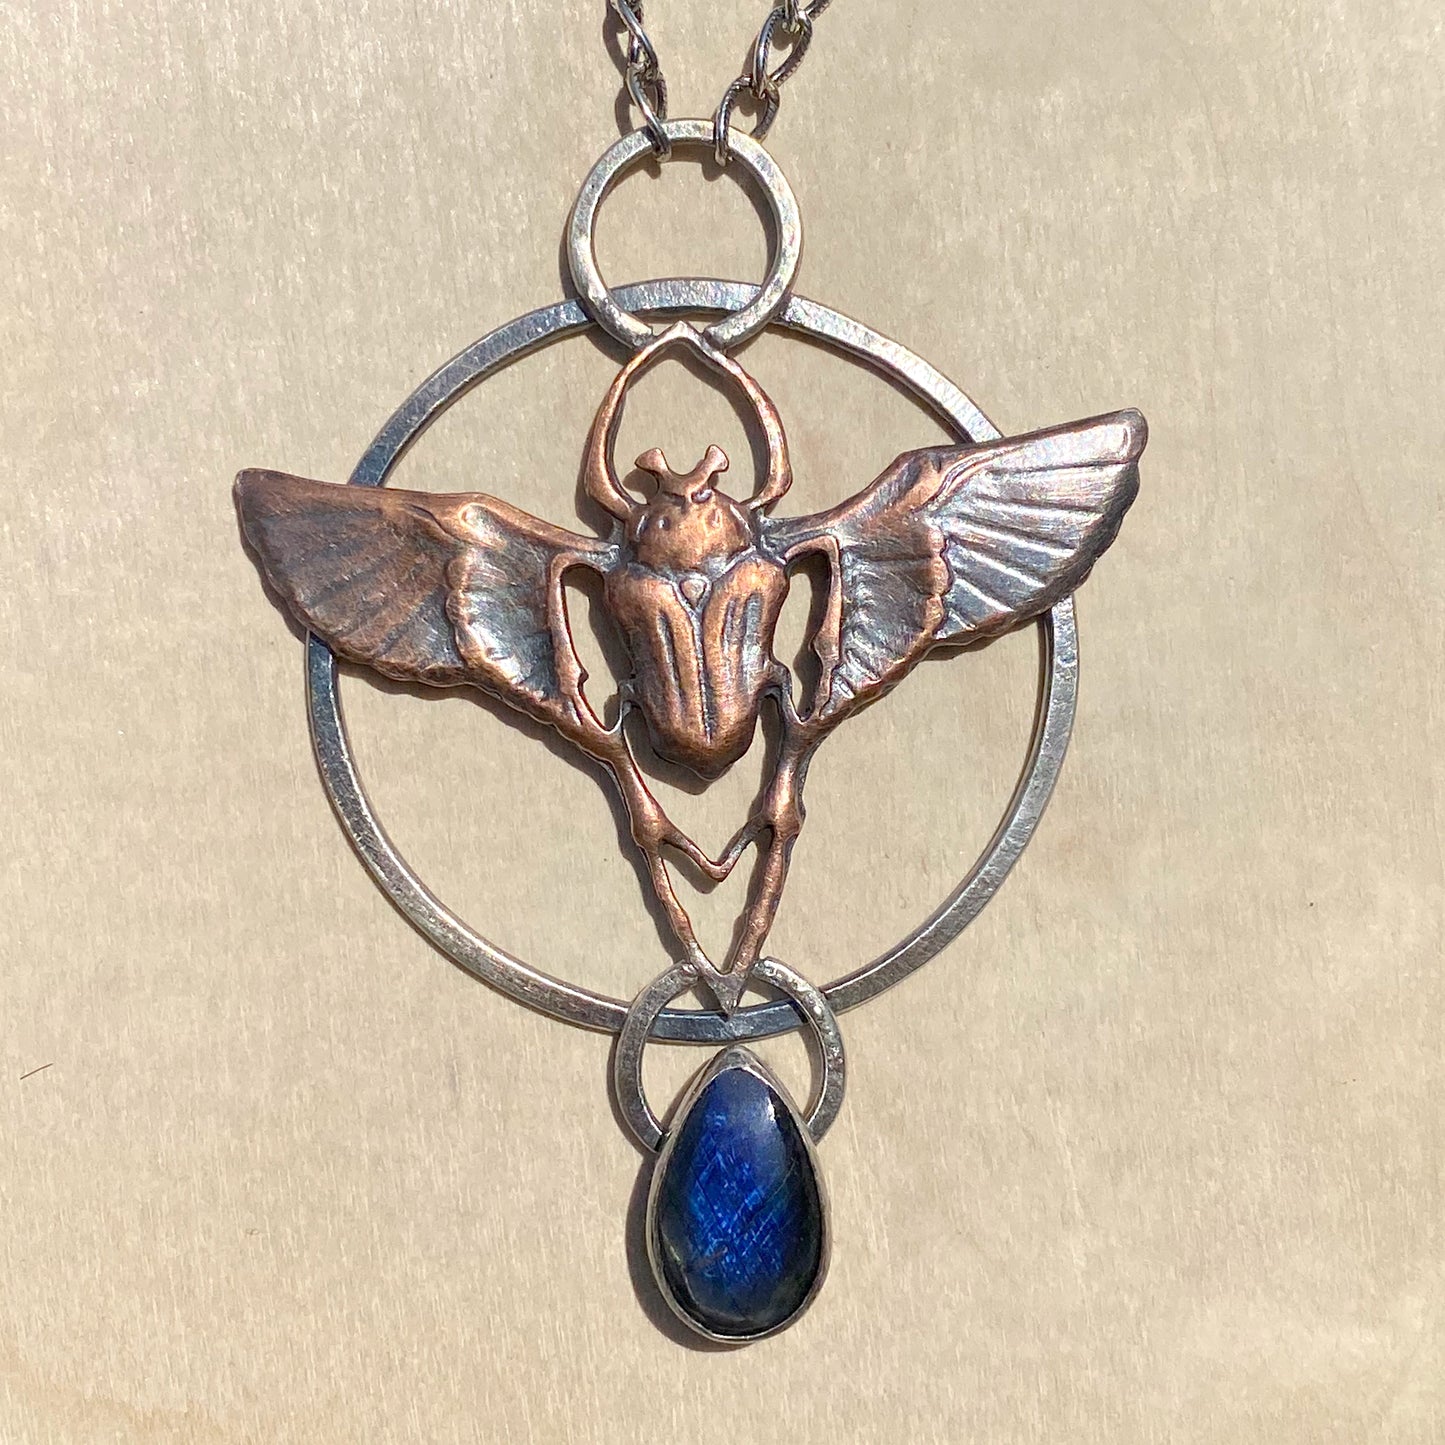 Spectrolite Scarab Pendant Necklace - Stone Treasures by the Lake